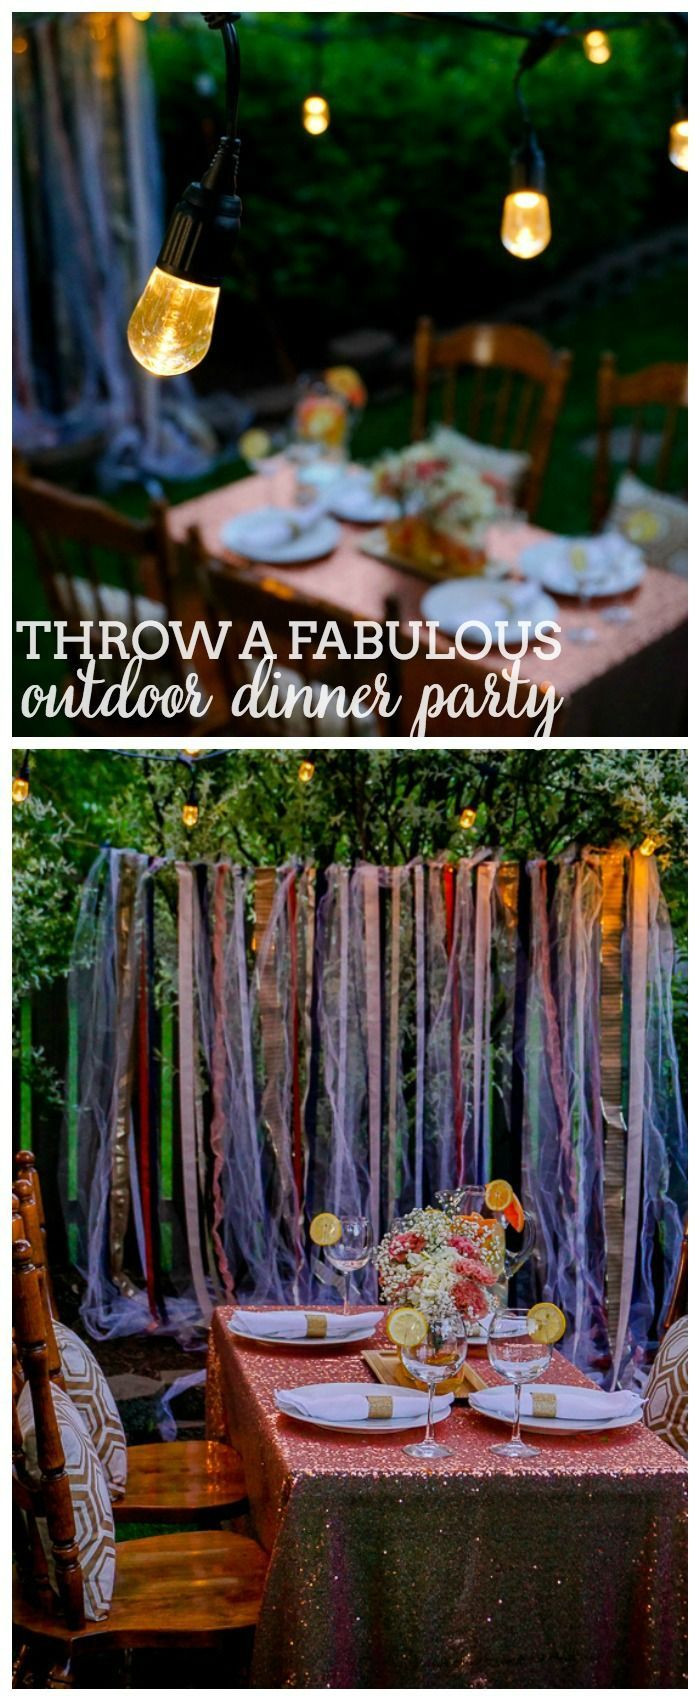 Dinner Party Games Ideas
 Best 25 Dinner party games ideas on Pinterest